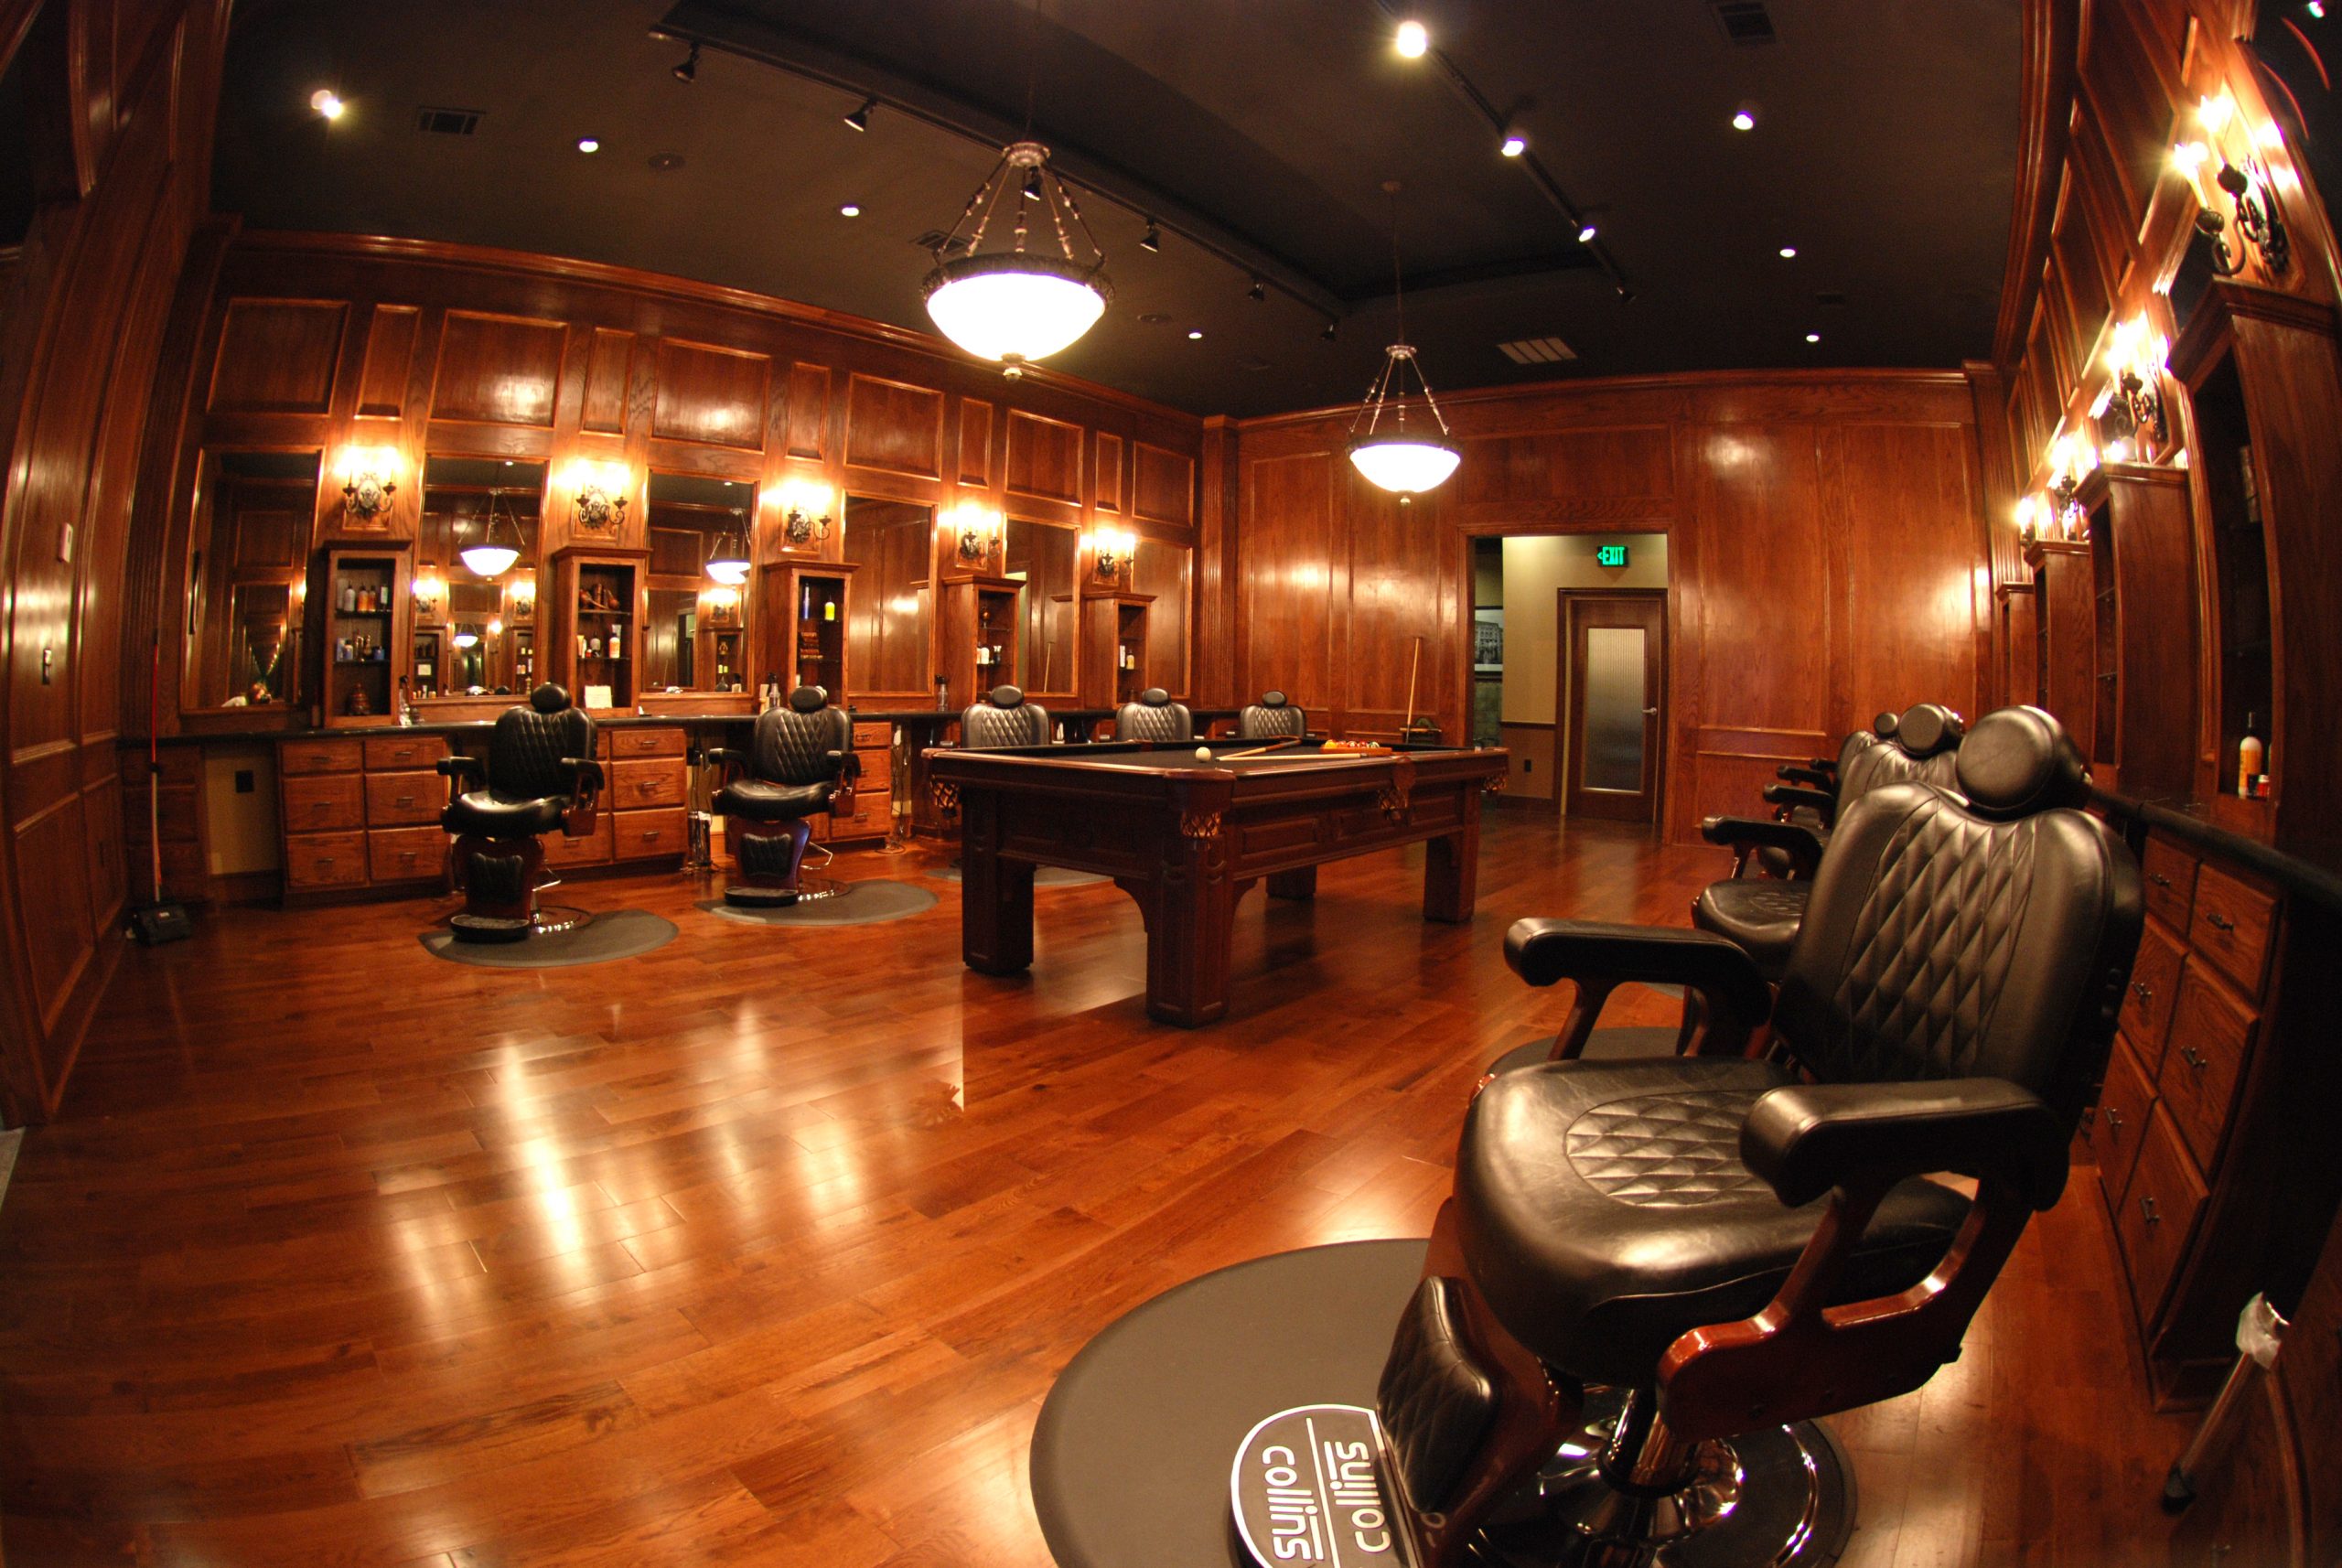 7 Incredible Barber Shops Across The US - 7Gents